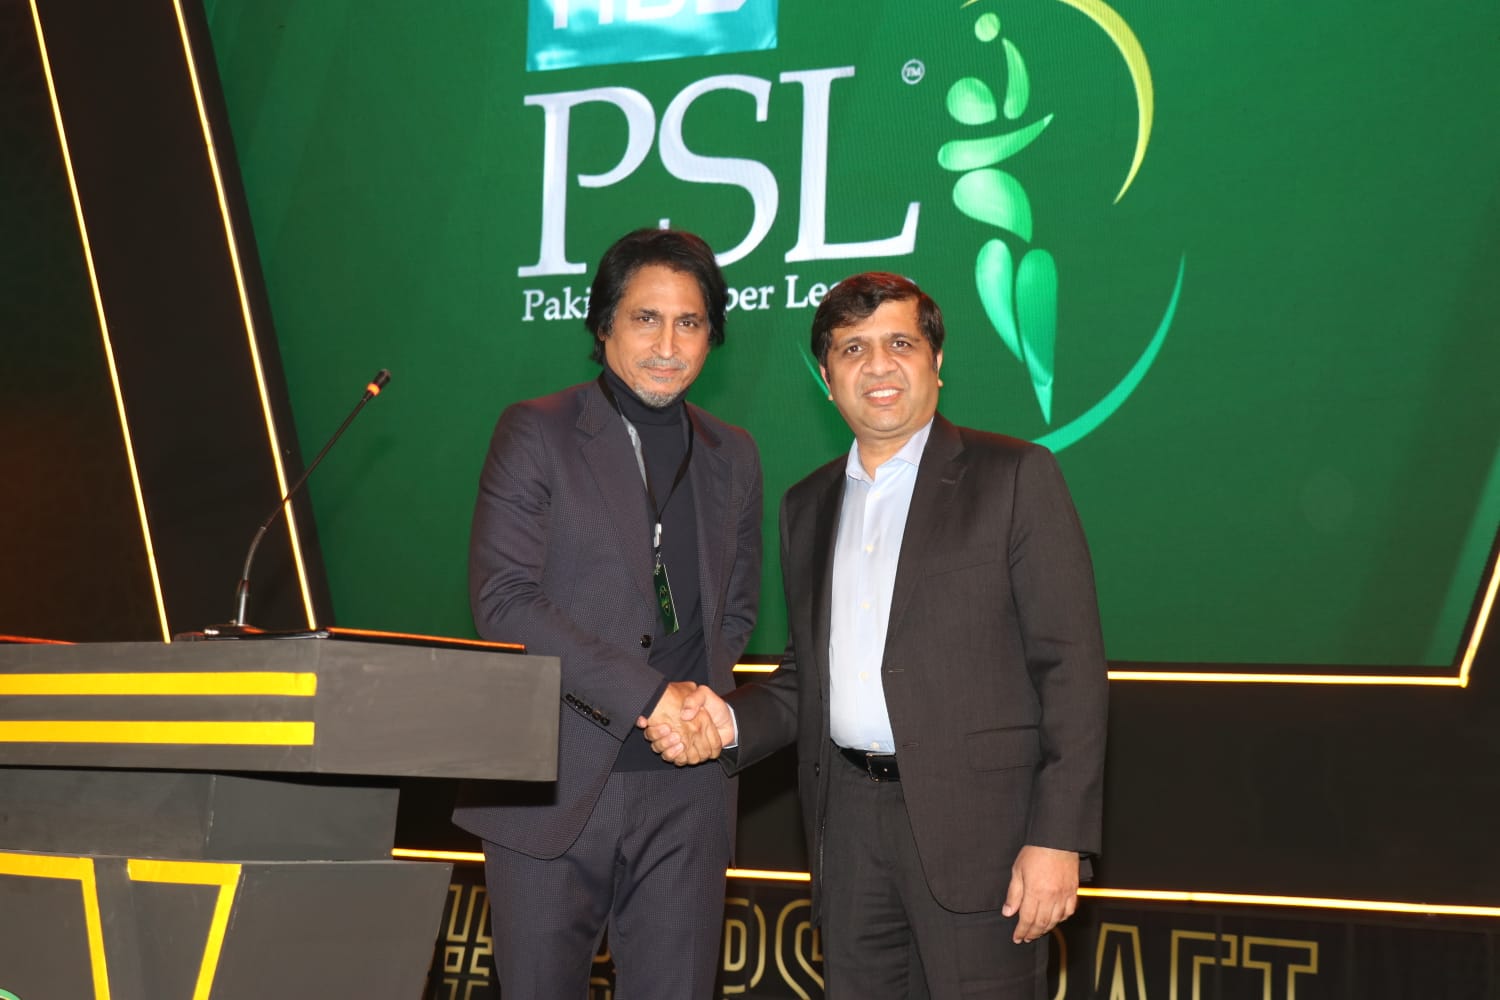 Lahore Rameez Raja announces drop-in pitches in Karachi and Lahore.